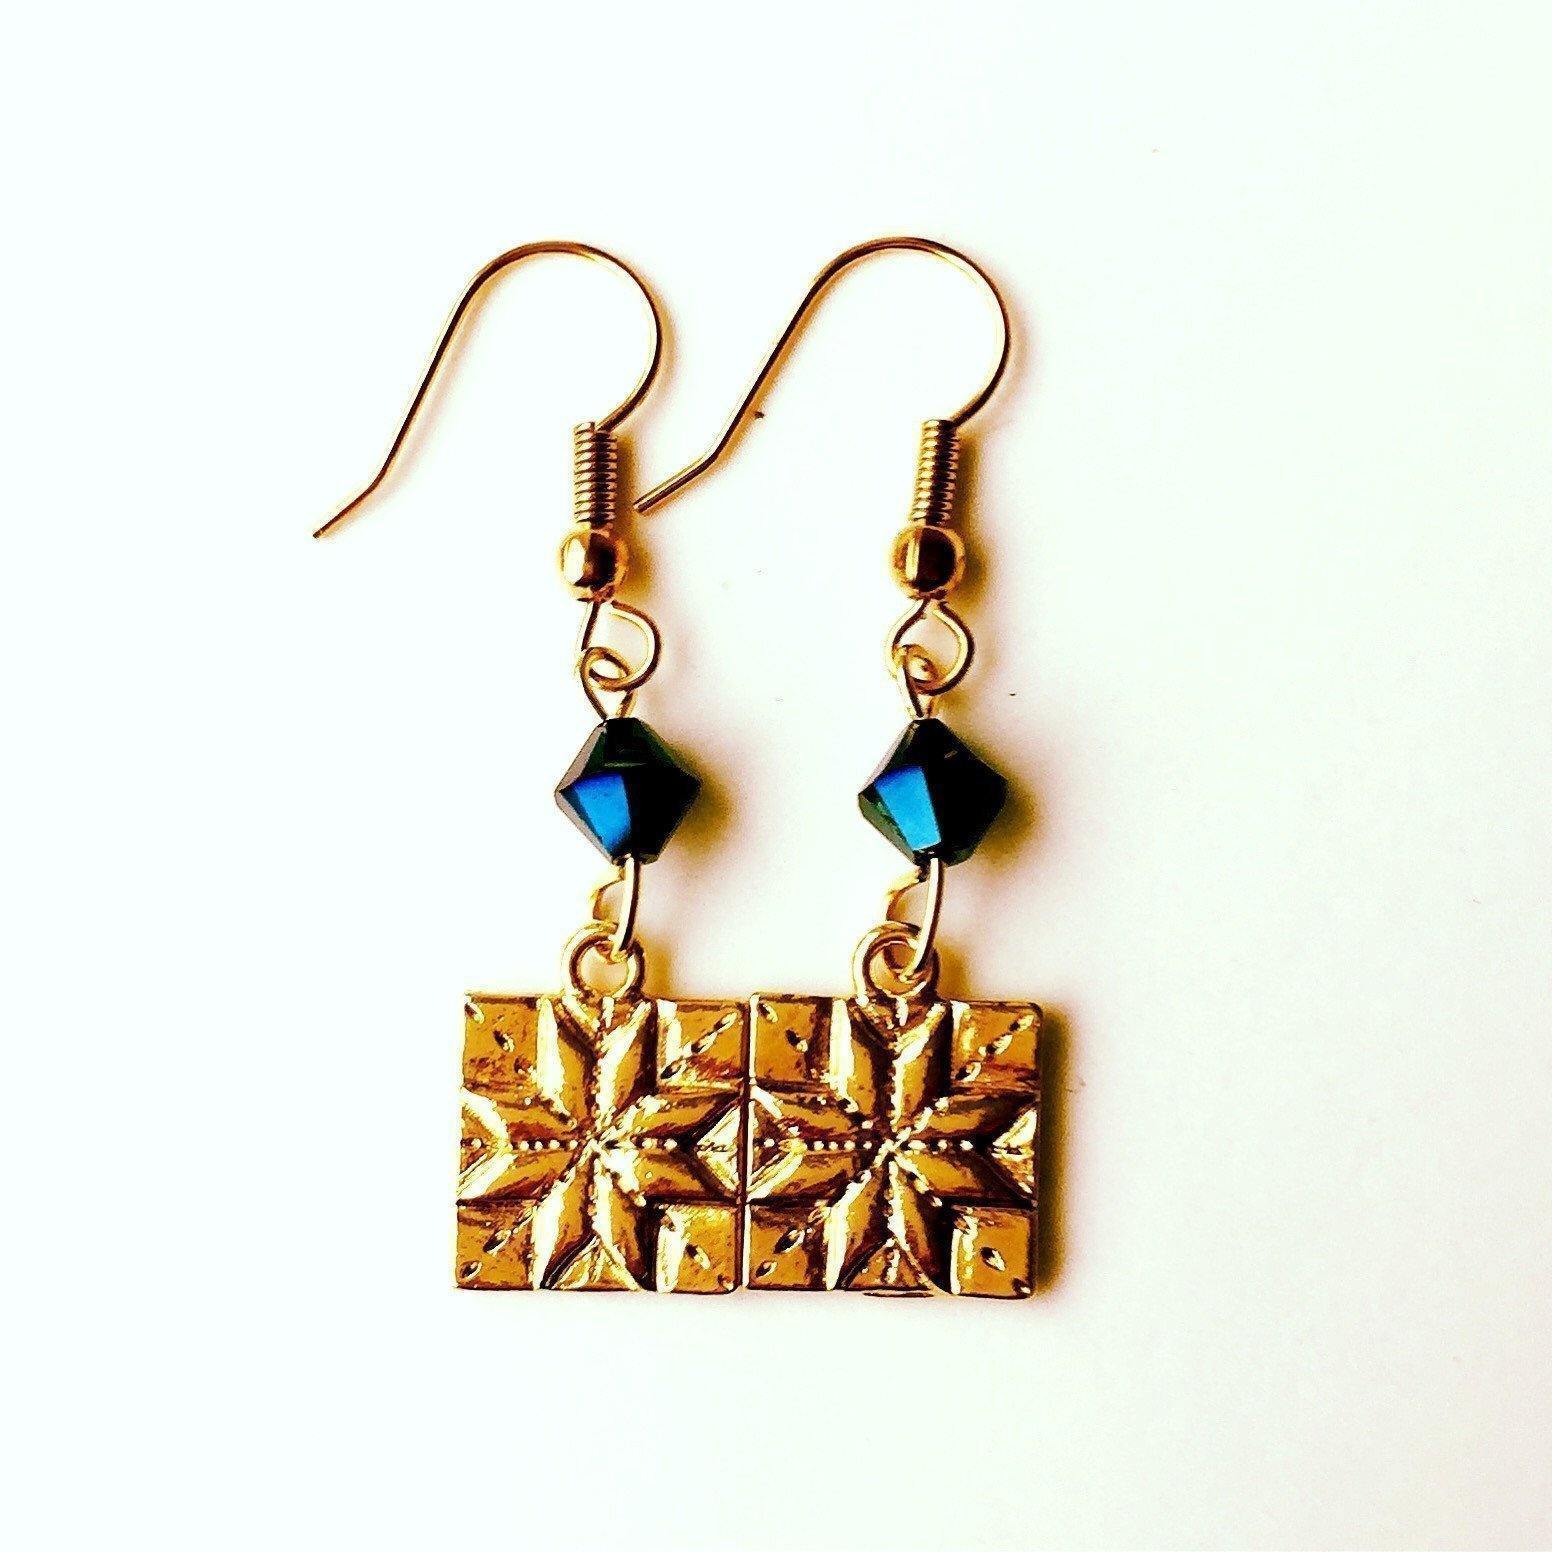 Quilt Patch Gold Earrings with Blue Swarovski Crystals-Watchus